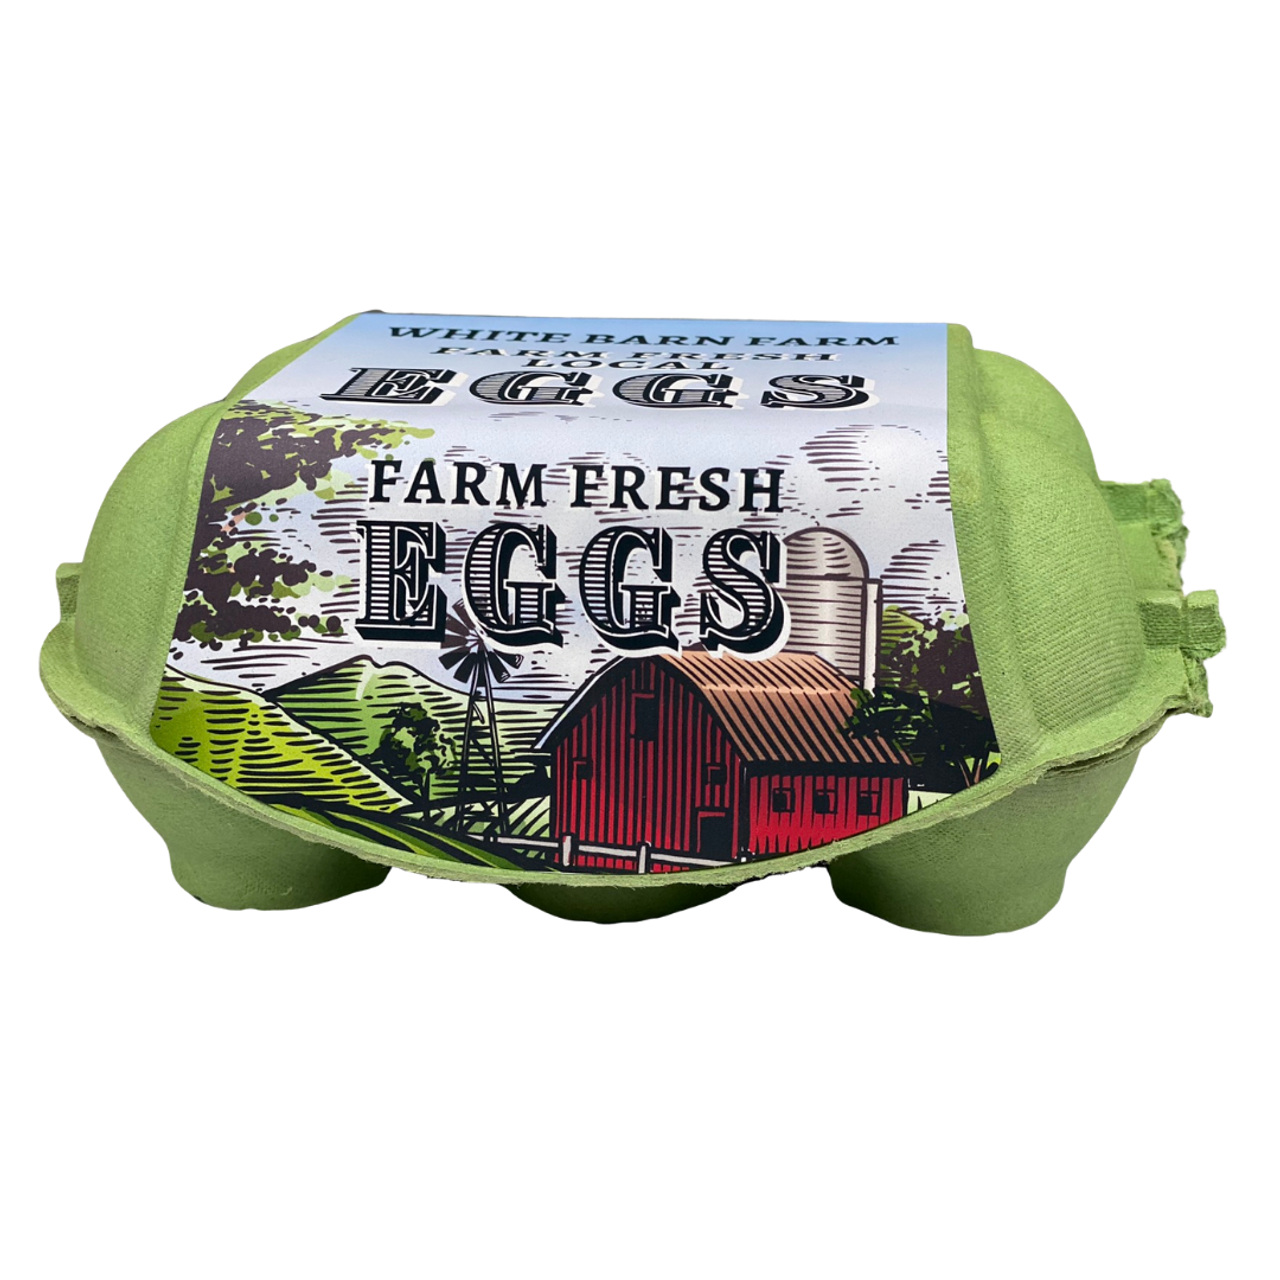 Customize your egg cartons with this personalized red barn full